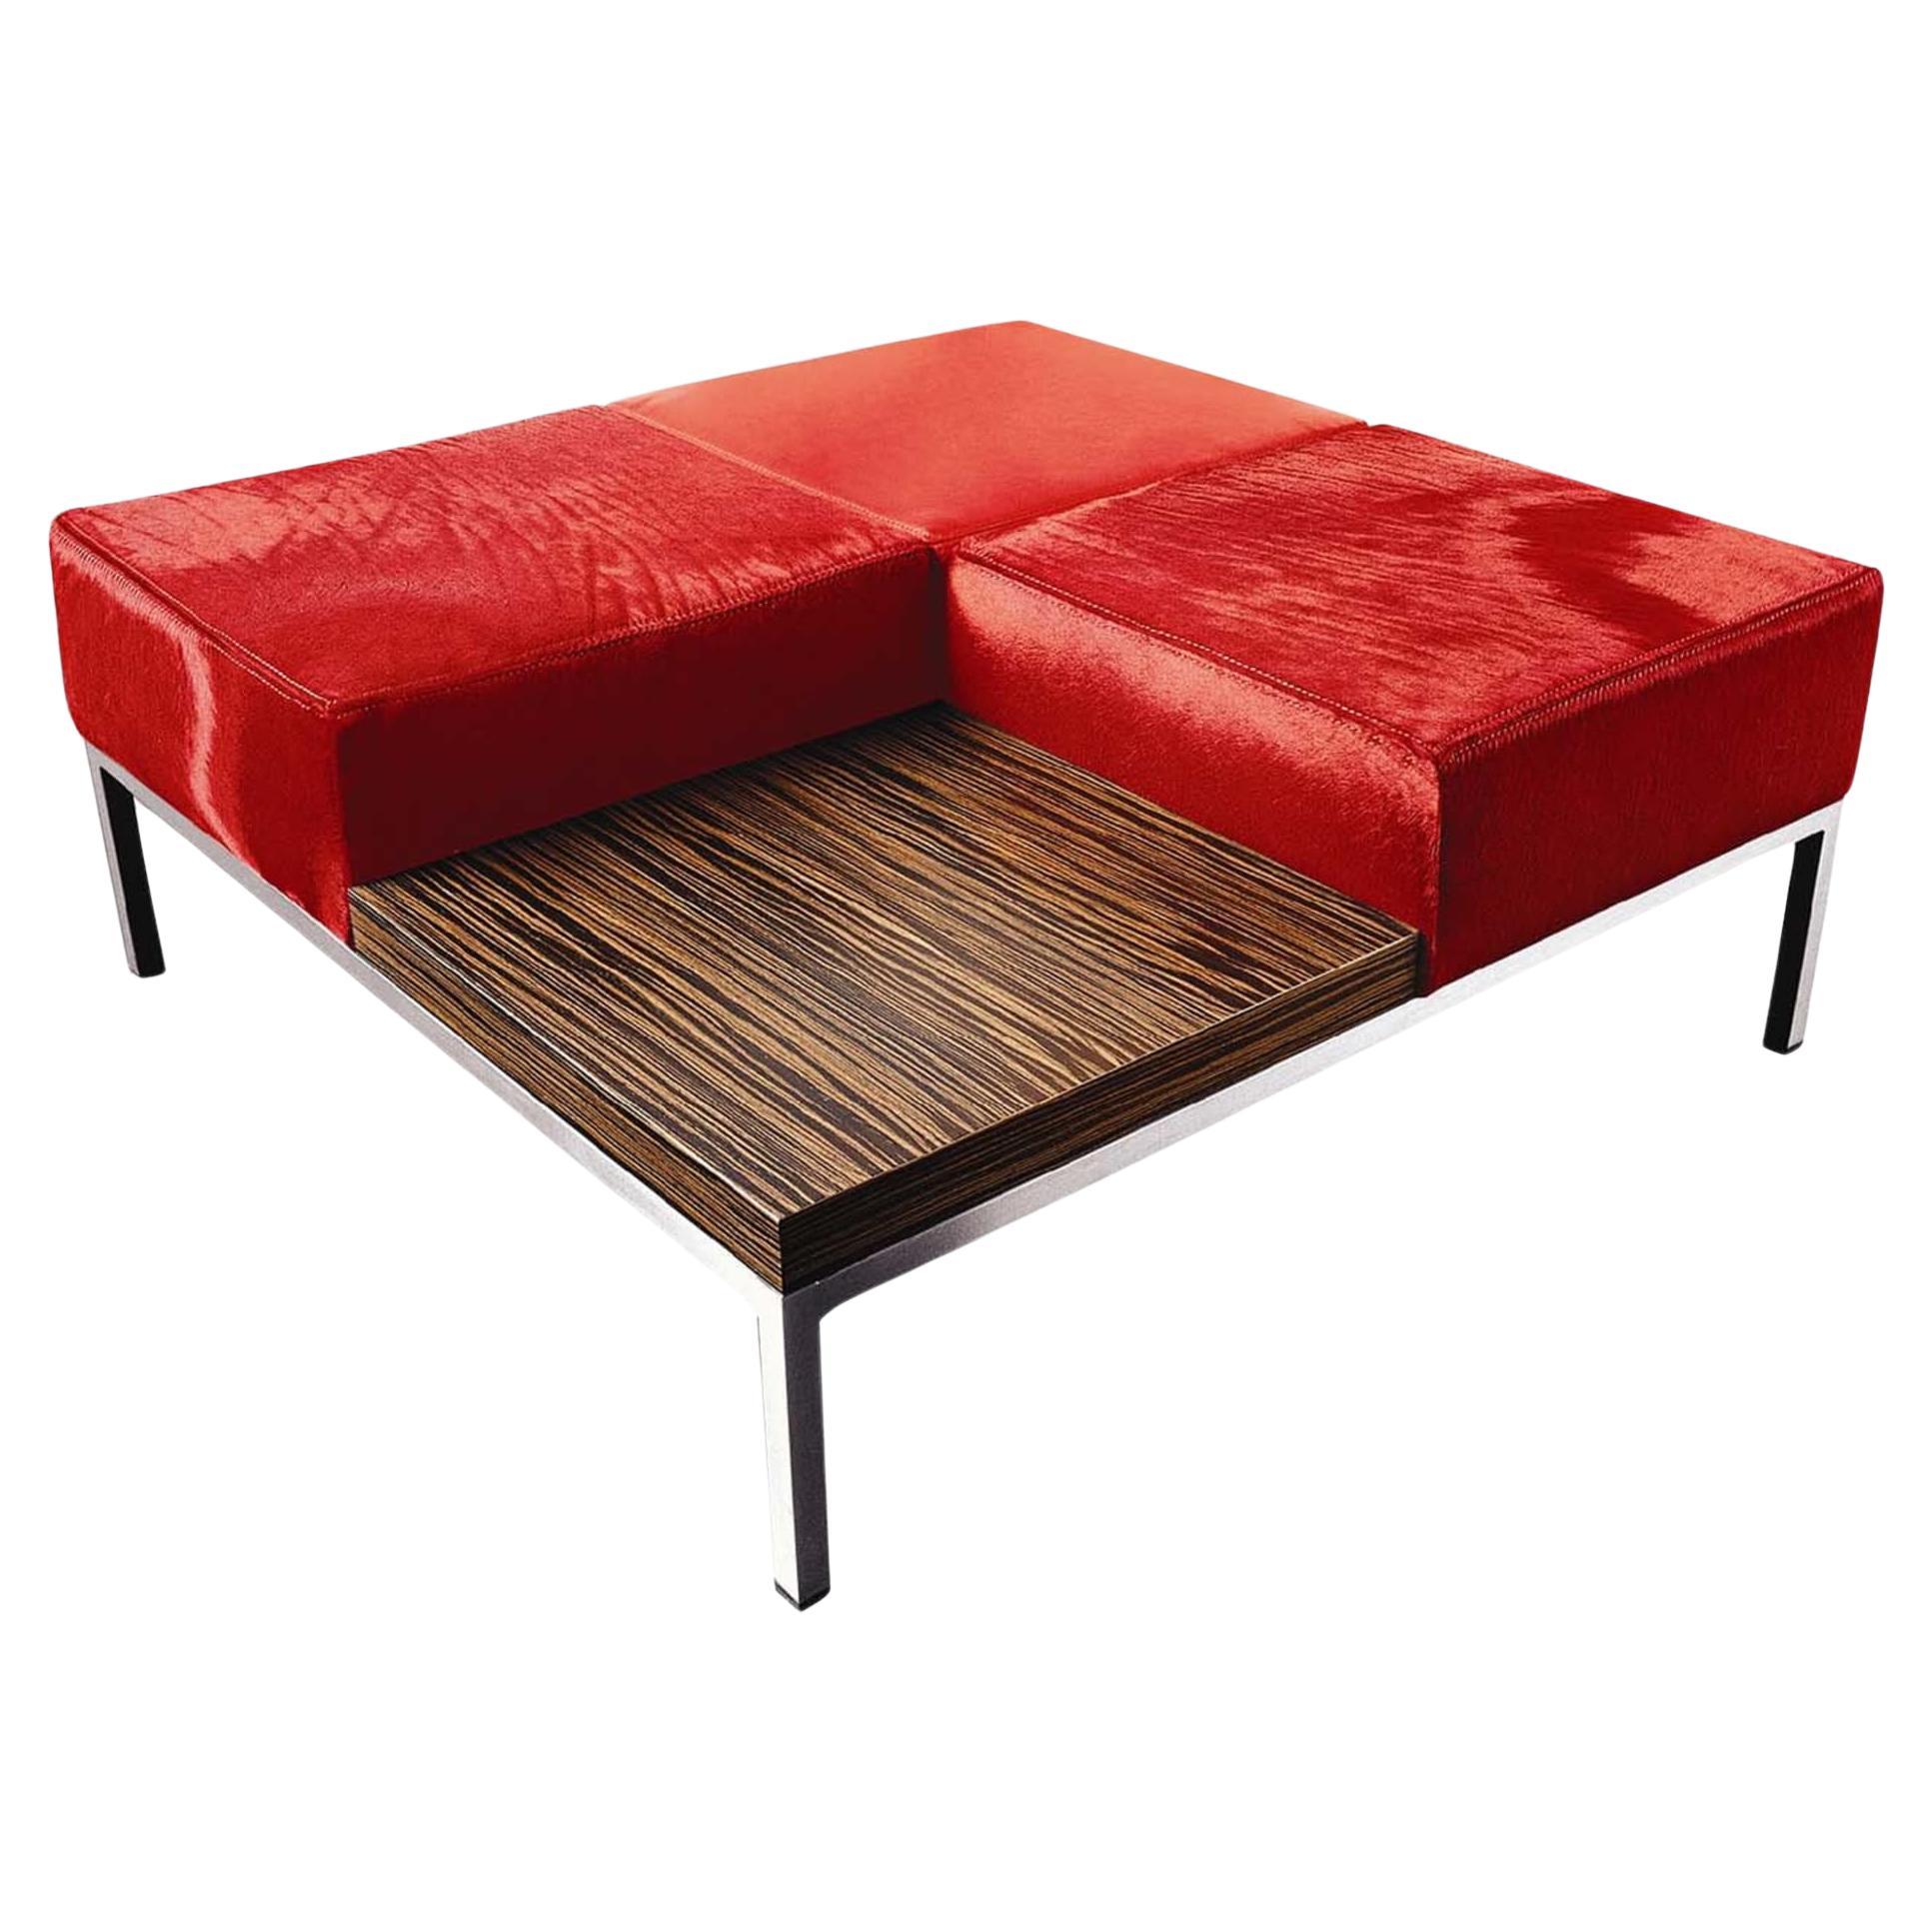 Every 3-Seater Pouf with Side Table